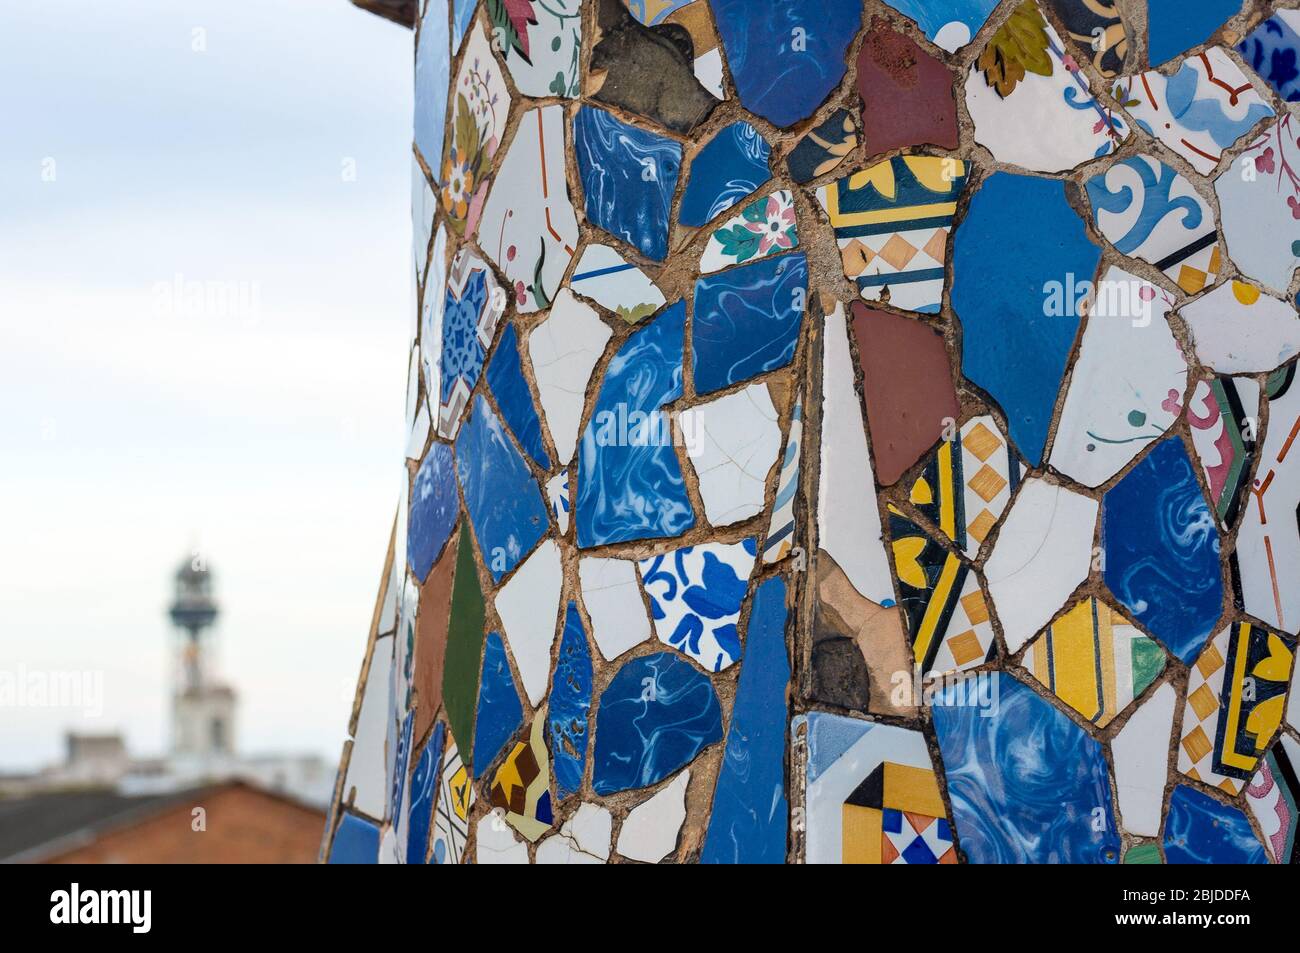 Barcelona, Spain - September 20, 2014: Design of the roof of Palace Guell - Gaudi Chimney: broken tile mosaics and strange decorated chimneys are evid Stock Photo